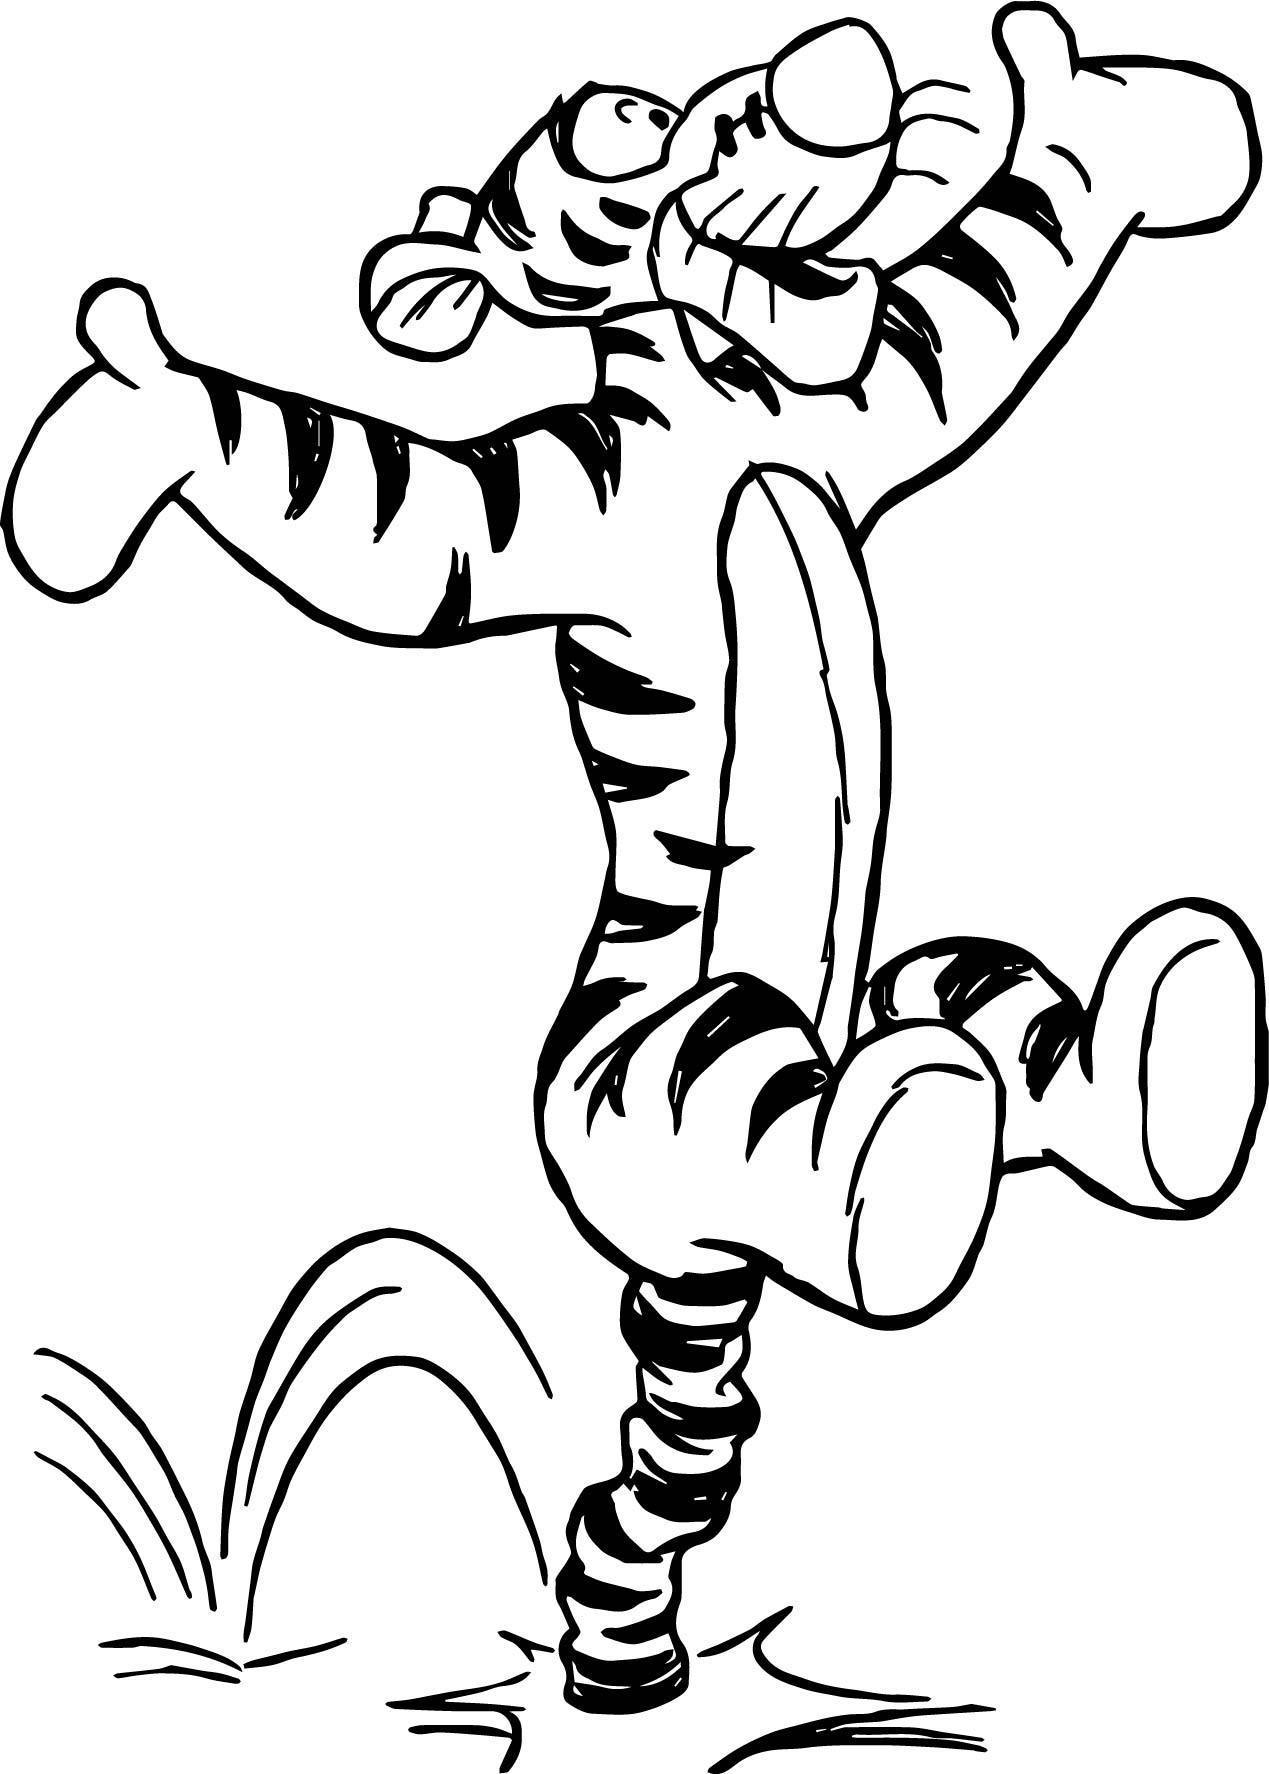 St Augustine Coloring Page Tigger Bounce Coloring Page Wecoloringpage Com For Ba Bouncer Empoto